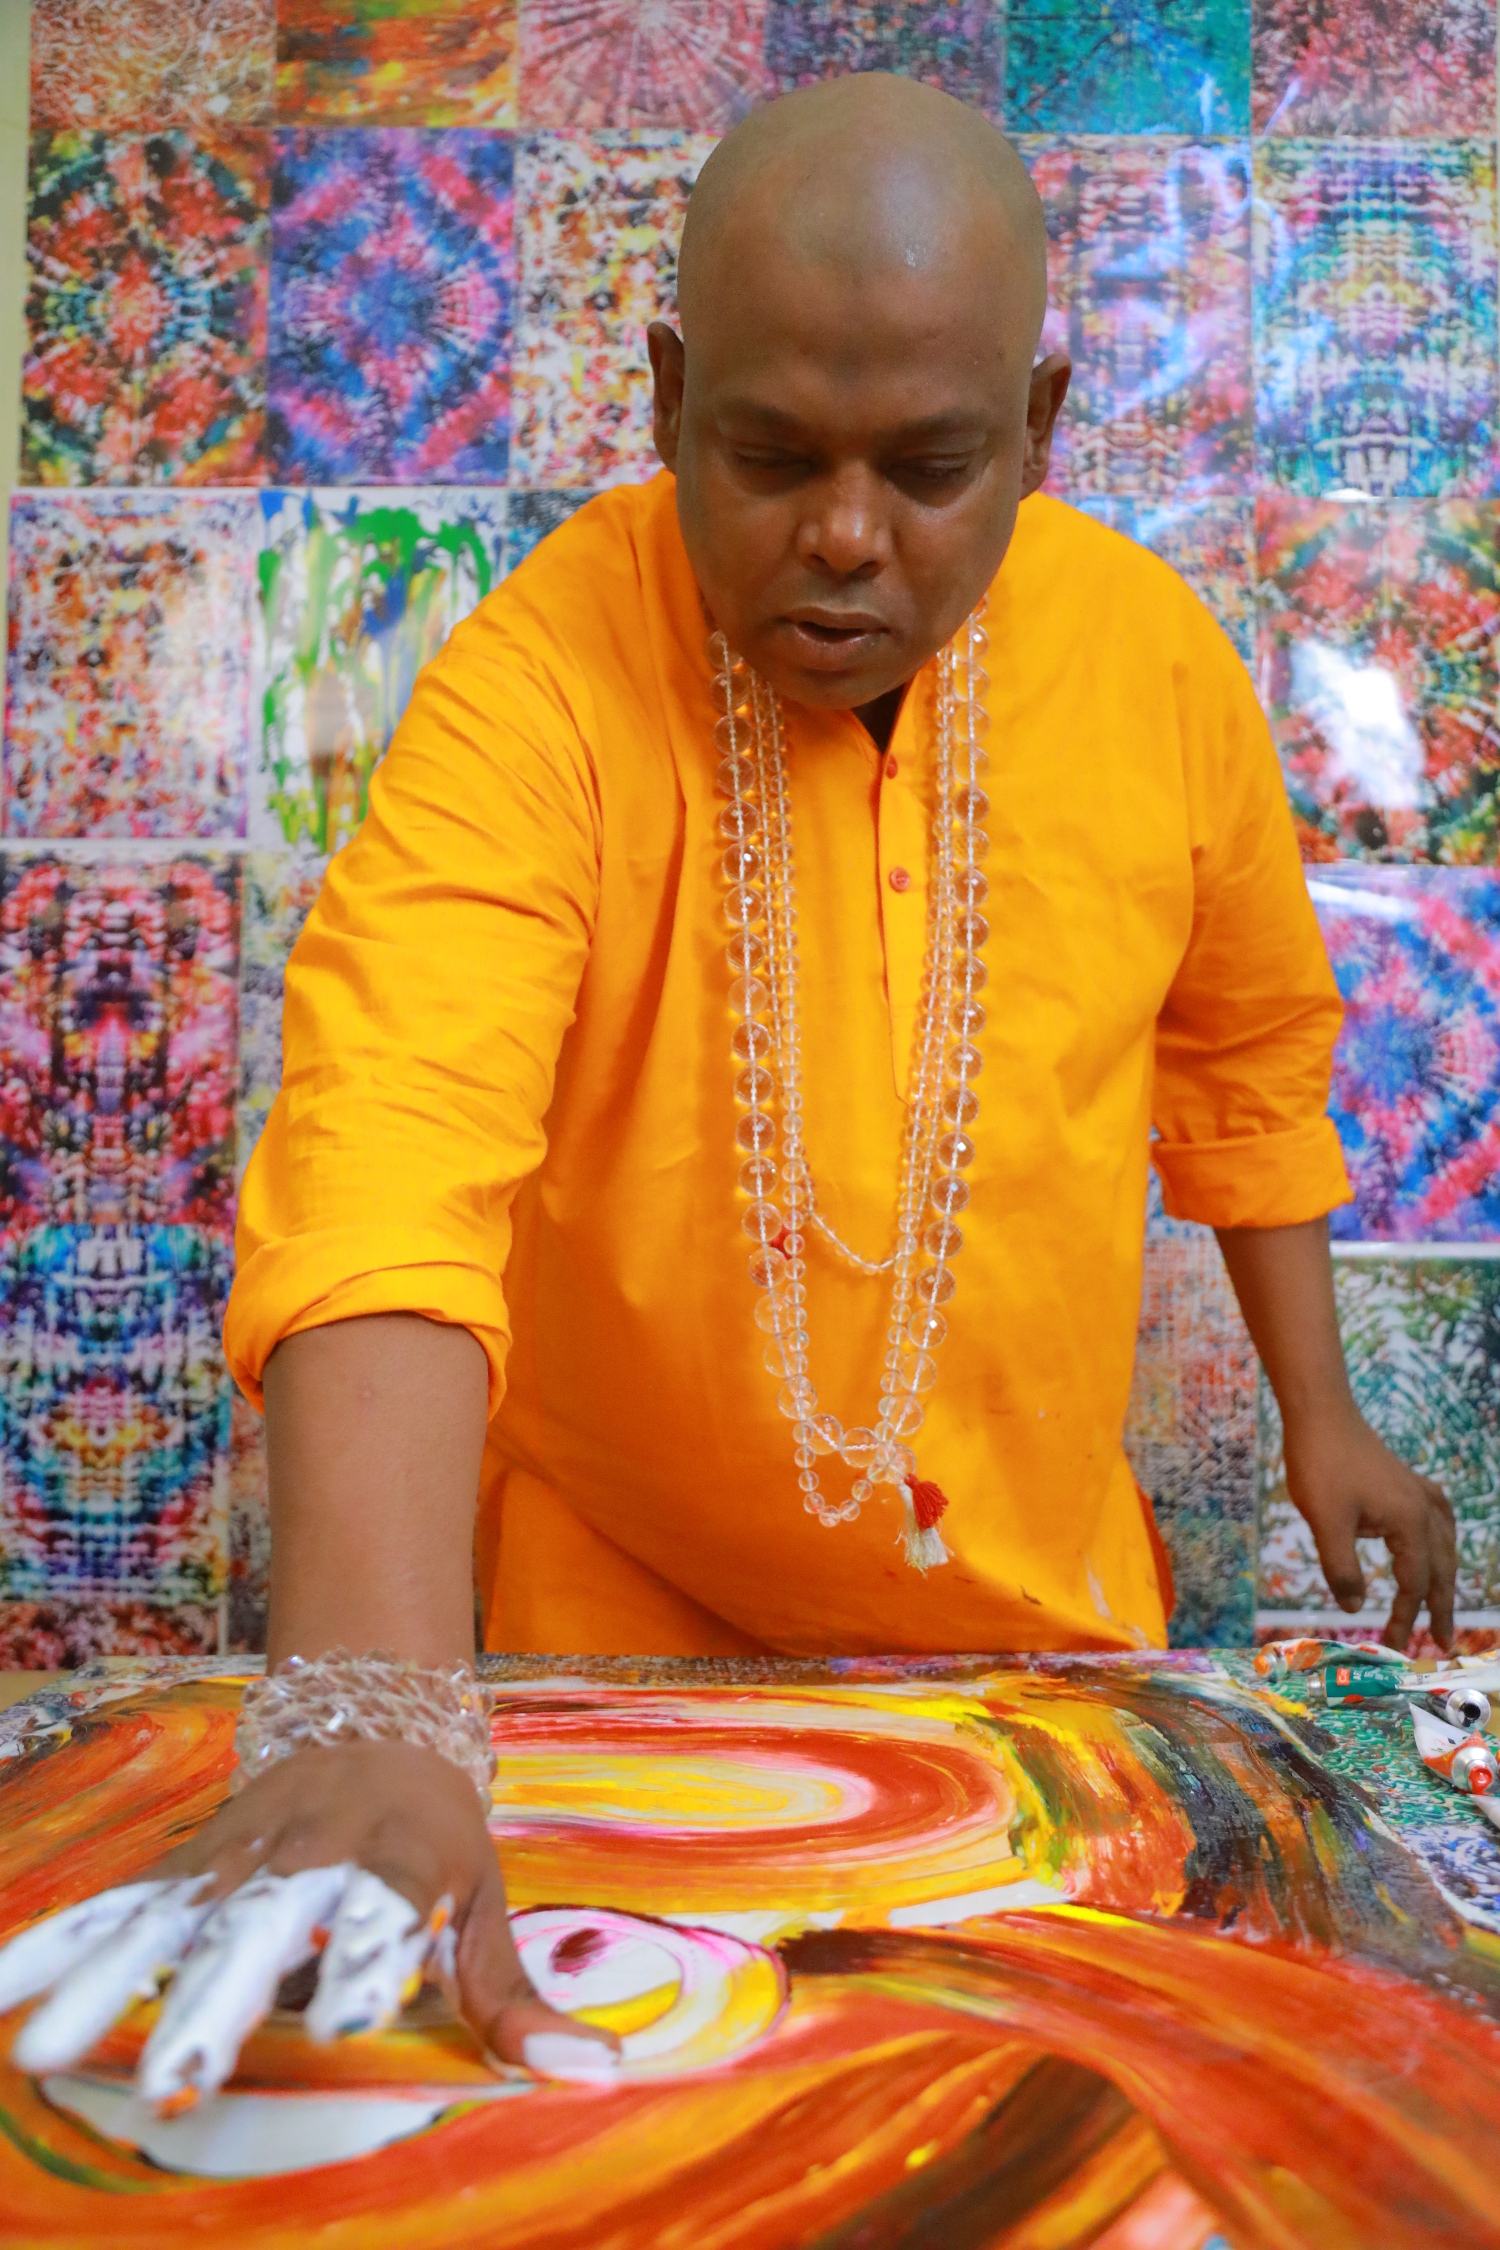 Parijoy Saha making a painting with bare hands.